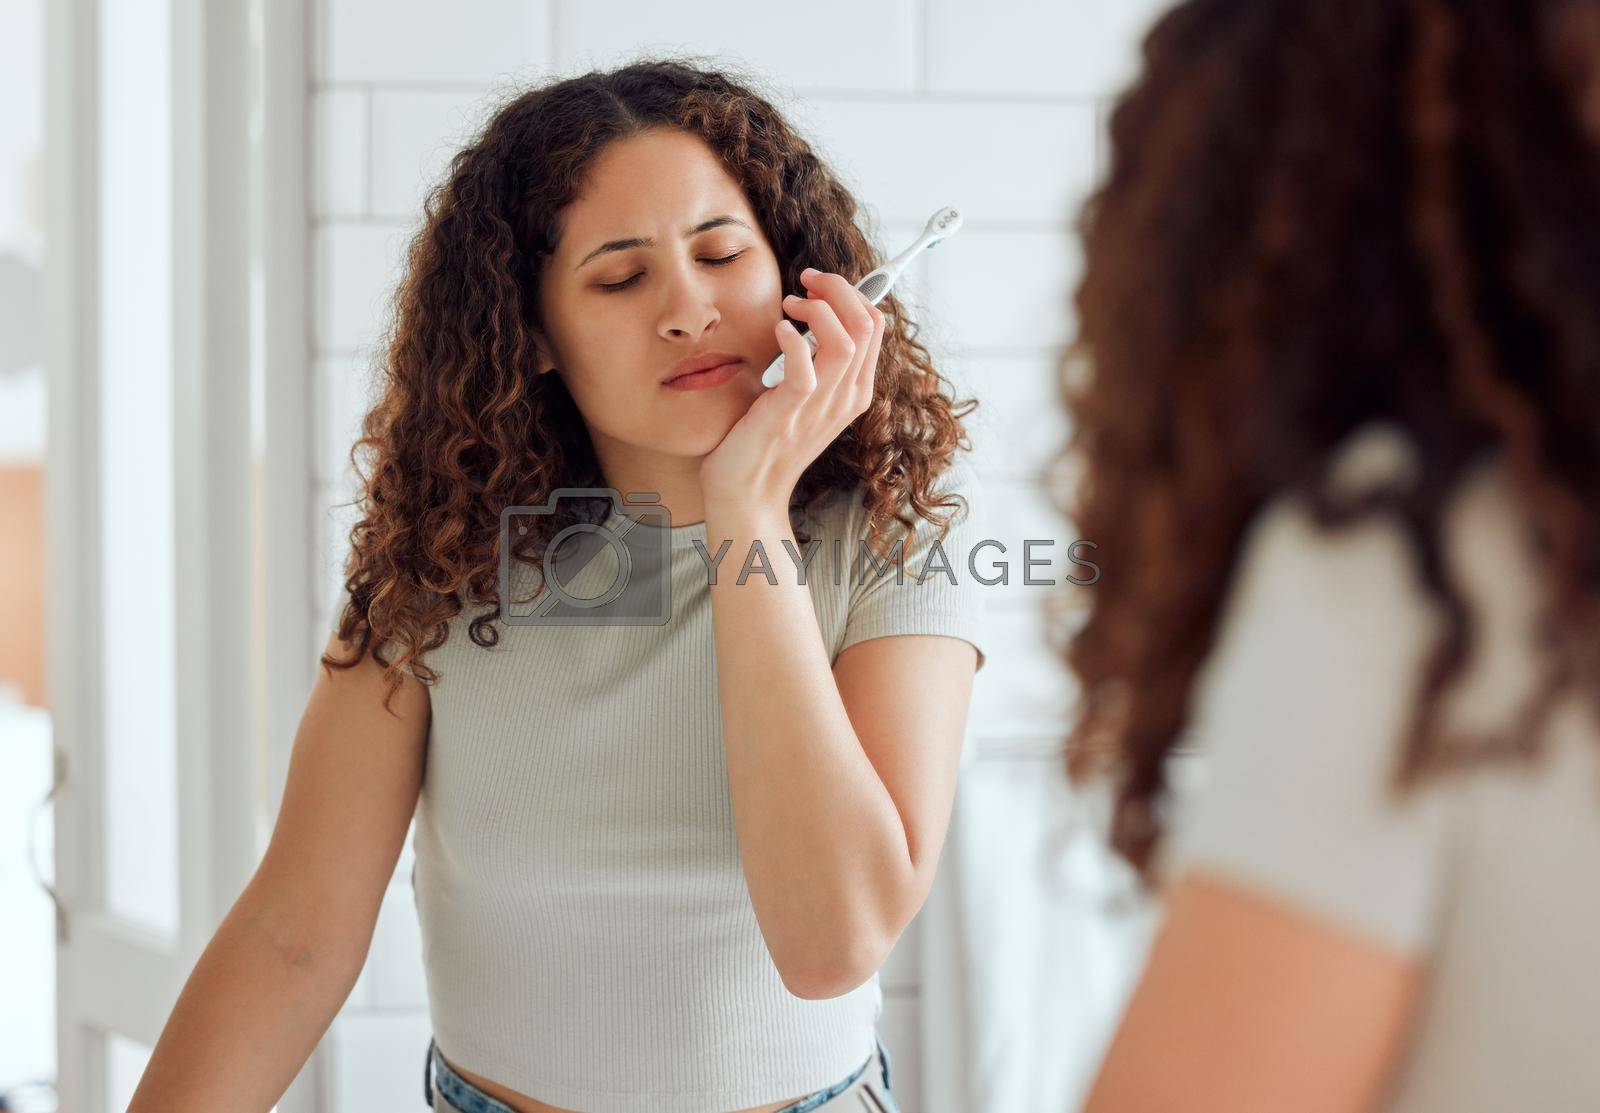 Royalty free image of Toothache, oral pain and dental sensitivity for a woman brushing her teeth in the morning. African American female suffering with a painful, hurting or inflammation in her mouth in the bathroom by YuriArcurs